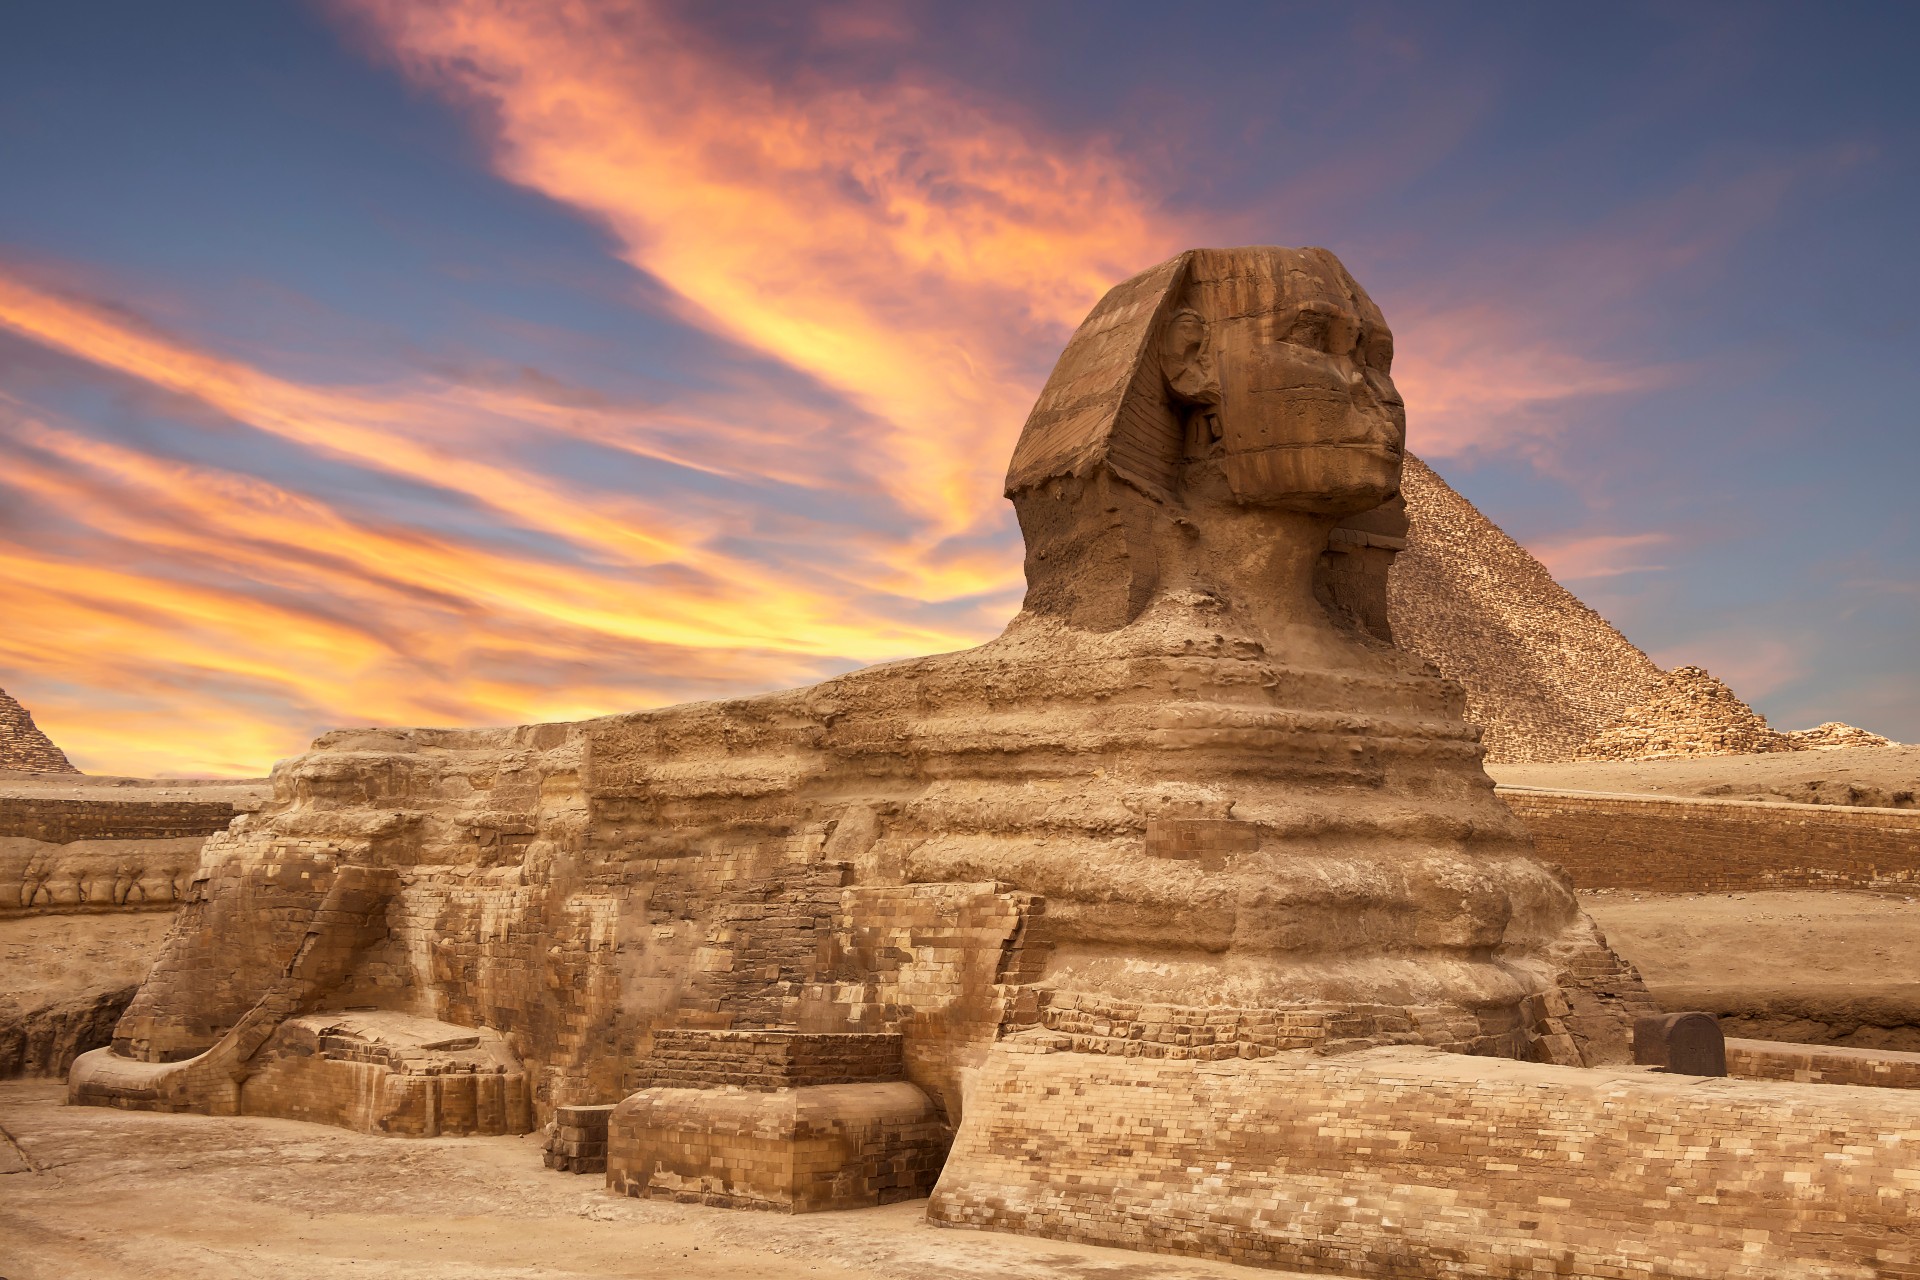 A photo of the Sphinx in Egypt